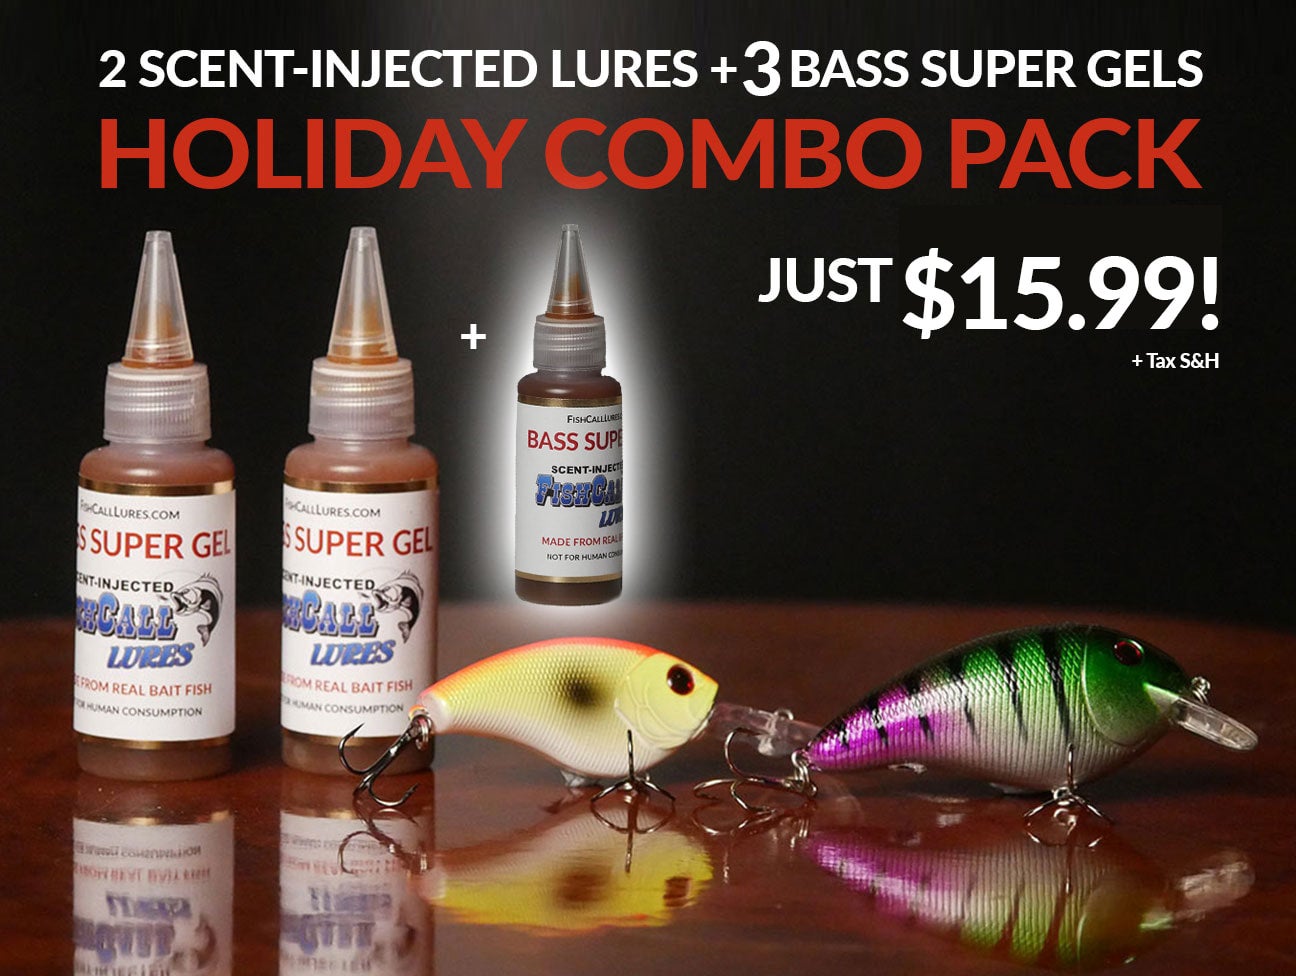 Home  Scent-Injected FishCall Scented Lures for Bass, Trout, Perch,  Walleye and More